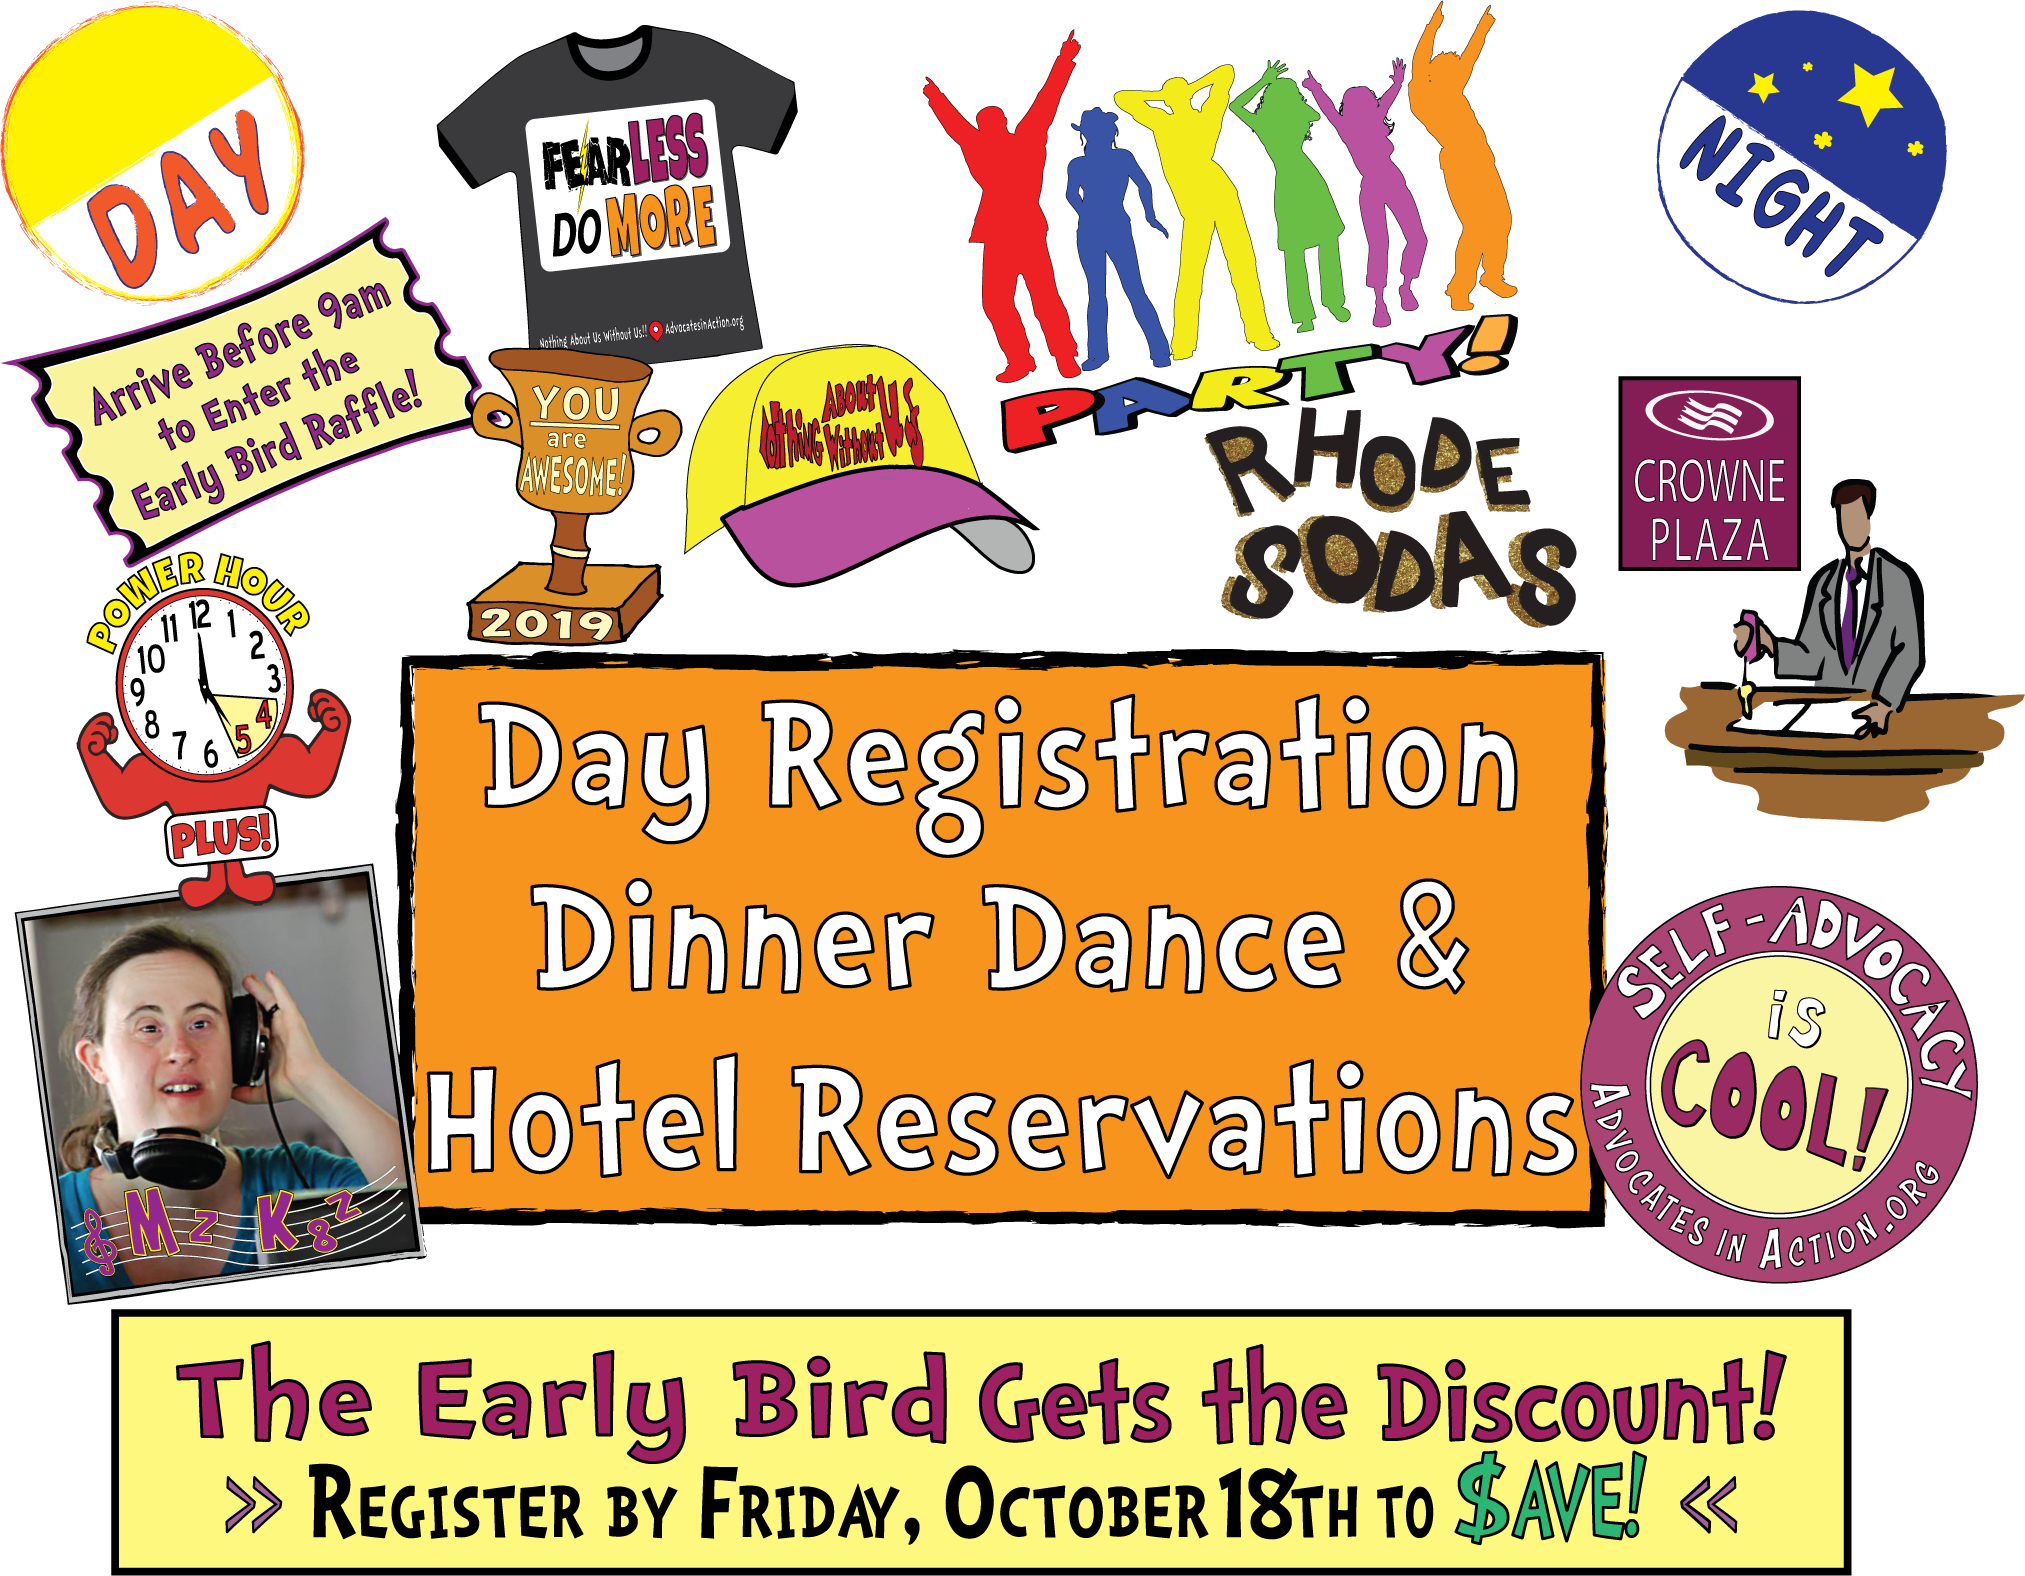 Day Registration Dinner Dance & Hotel Reservations.
The Early Bird gets the discount! Register by Friday, October 11th to Save!